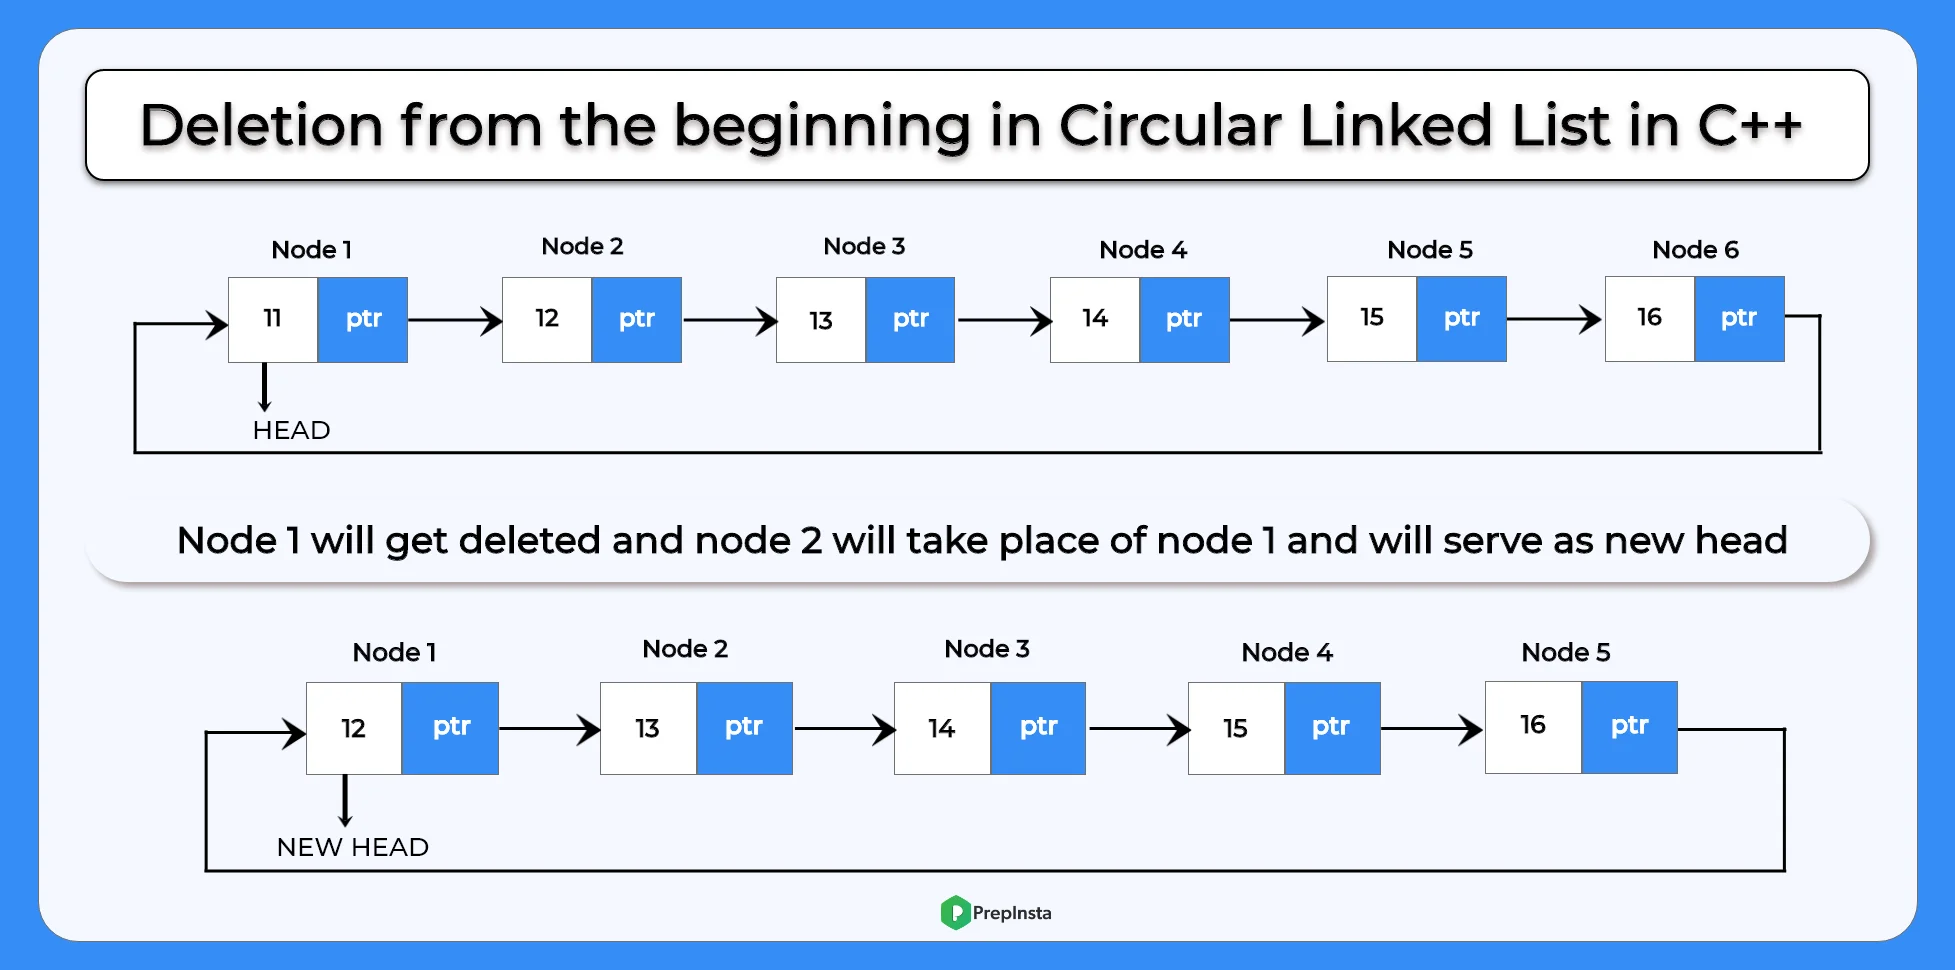 Deletion from beginning in circular linked list in C++